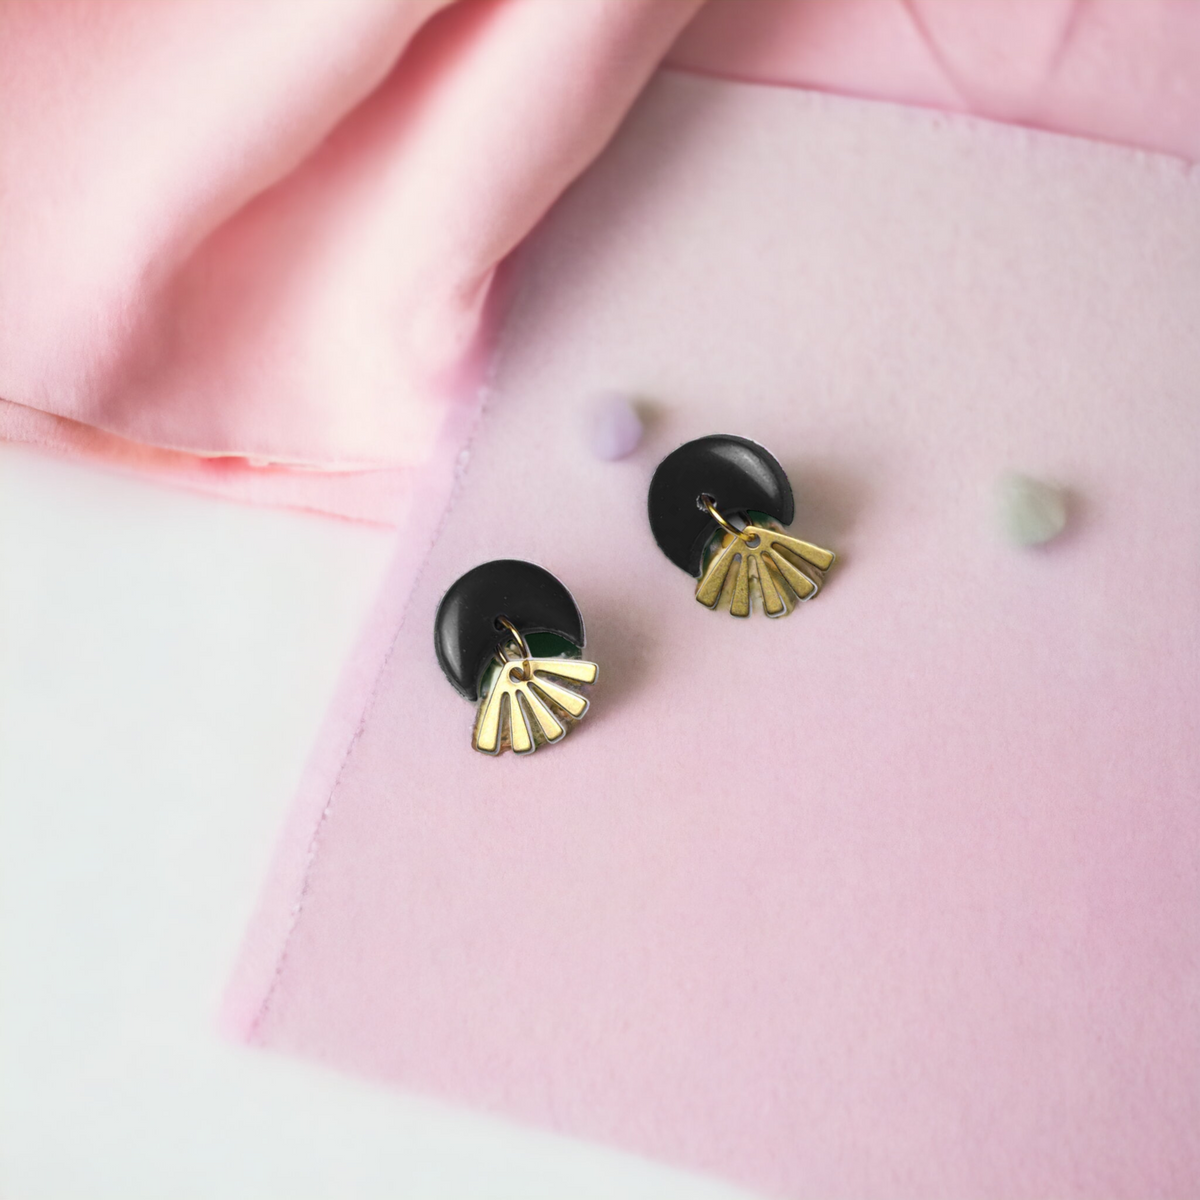 Tiny Black Crescent Moon with Brass Fan Charm Earrings